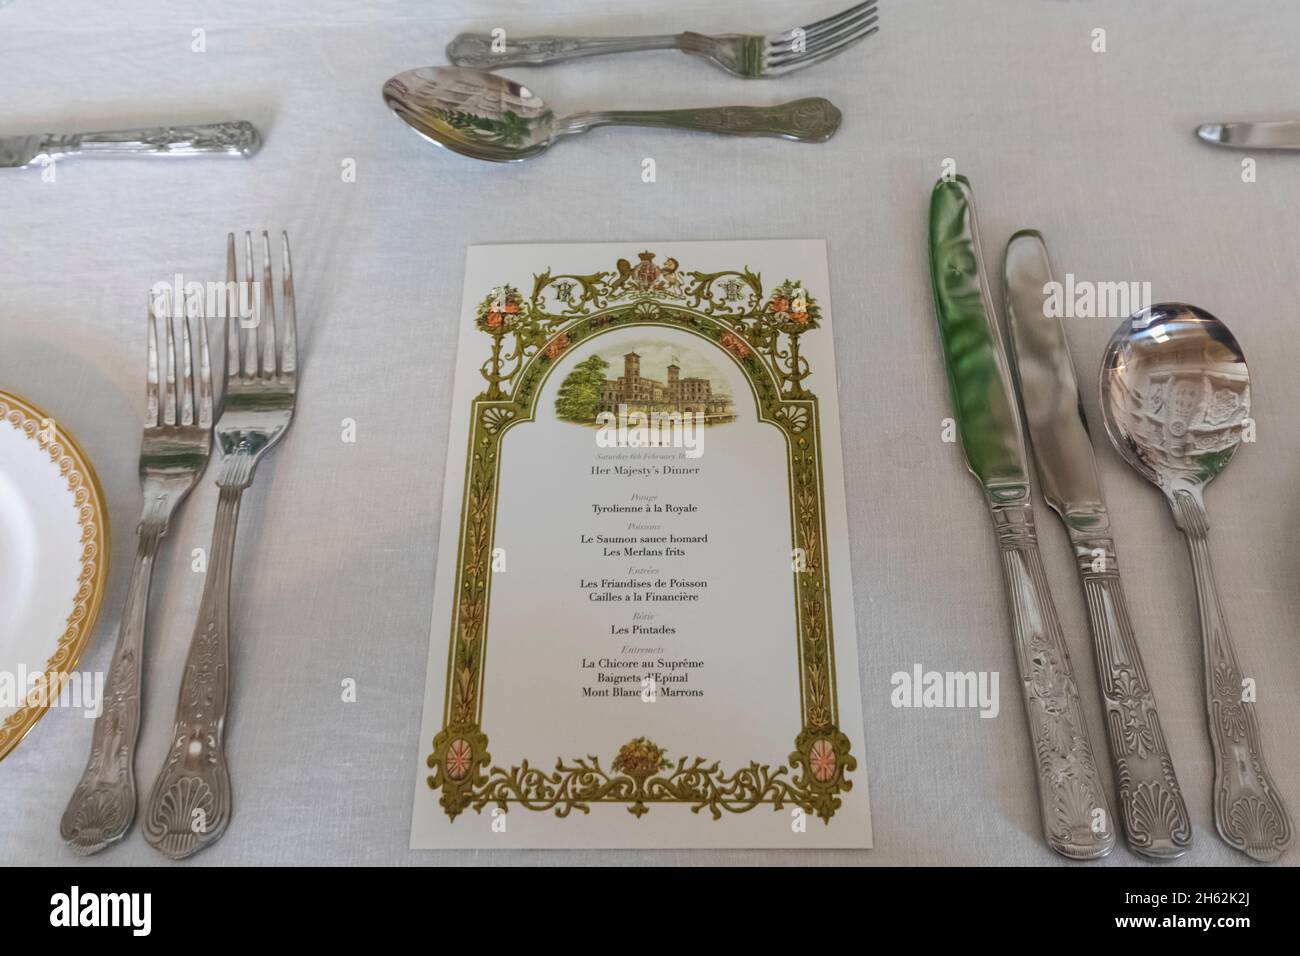 england,isle of wight,east cowes,osborne house,the palatial former home of queen victoria and prince albert,the durbar room,dining table place setting with her majesty's dinner menu in french Stock Photo